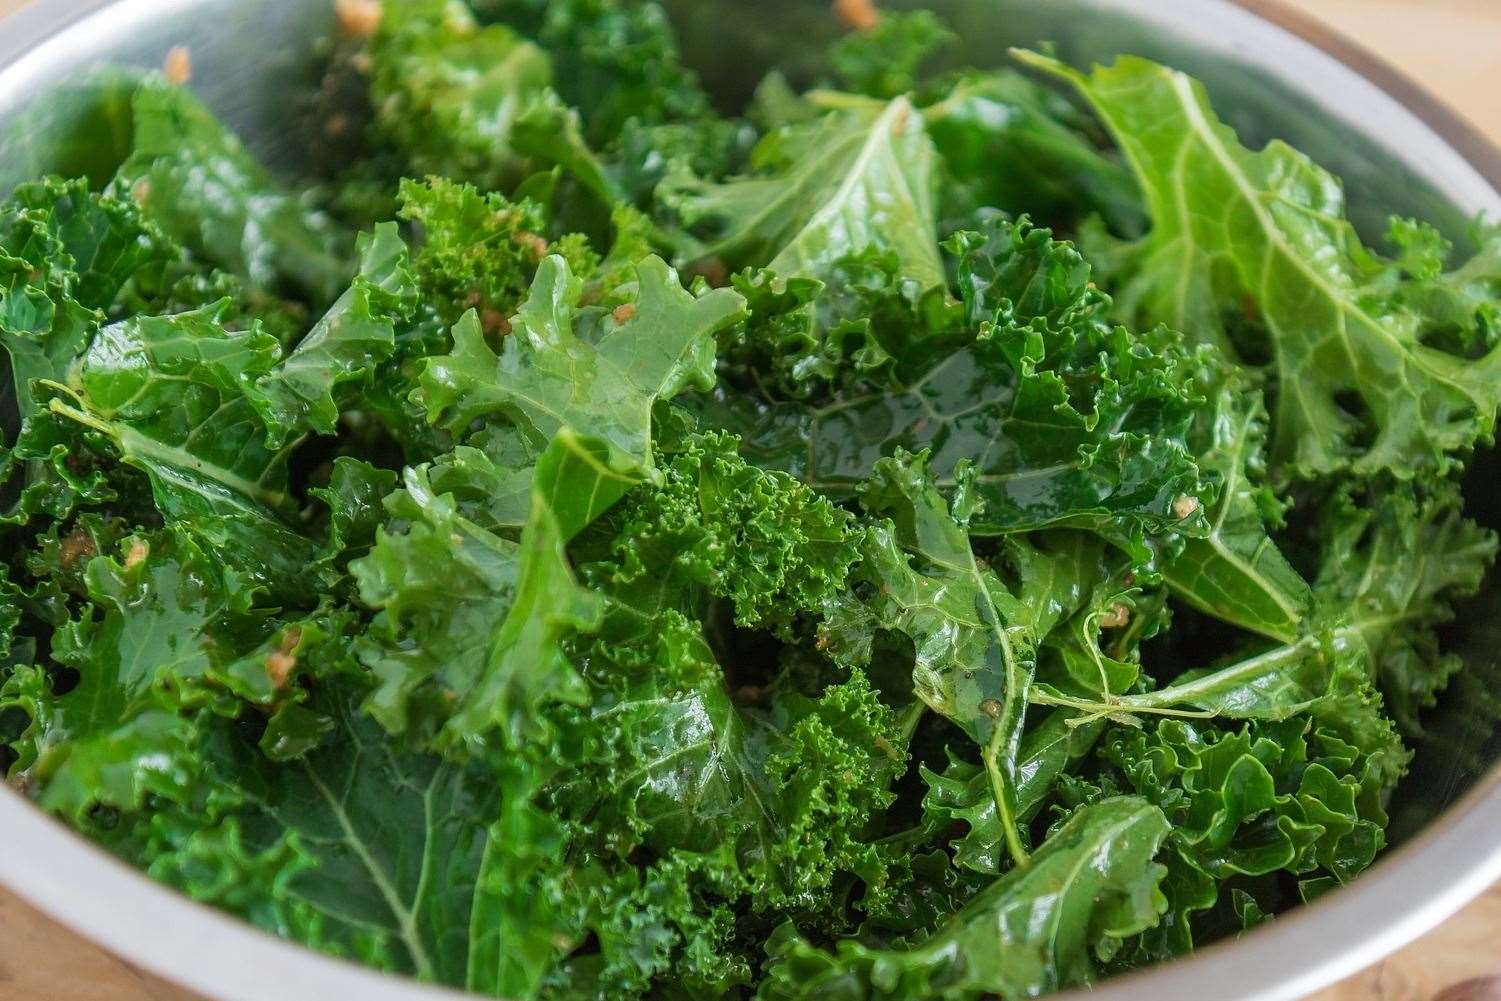 Leafy green vegetables contain more vitamins than most fruit